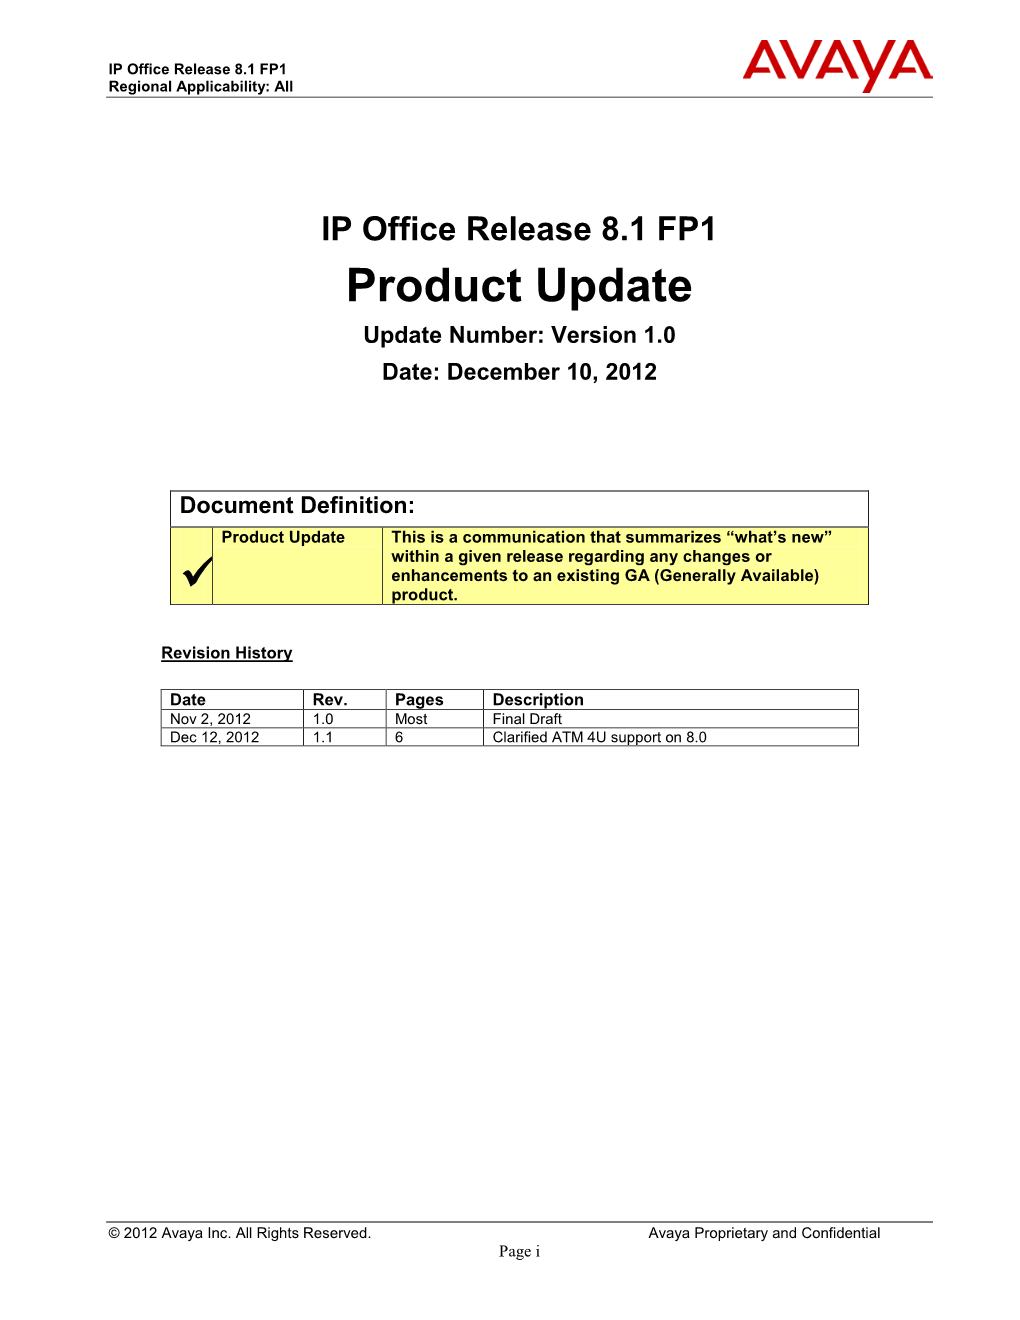 IP Office R6.1 Product Update